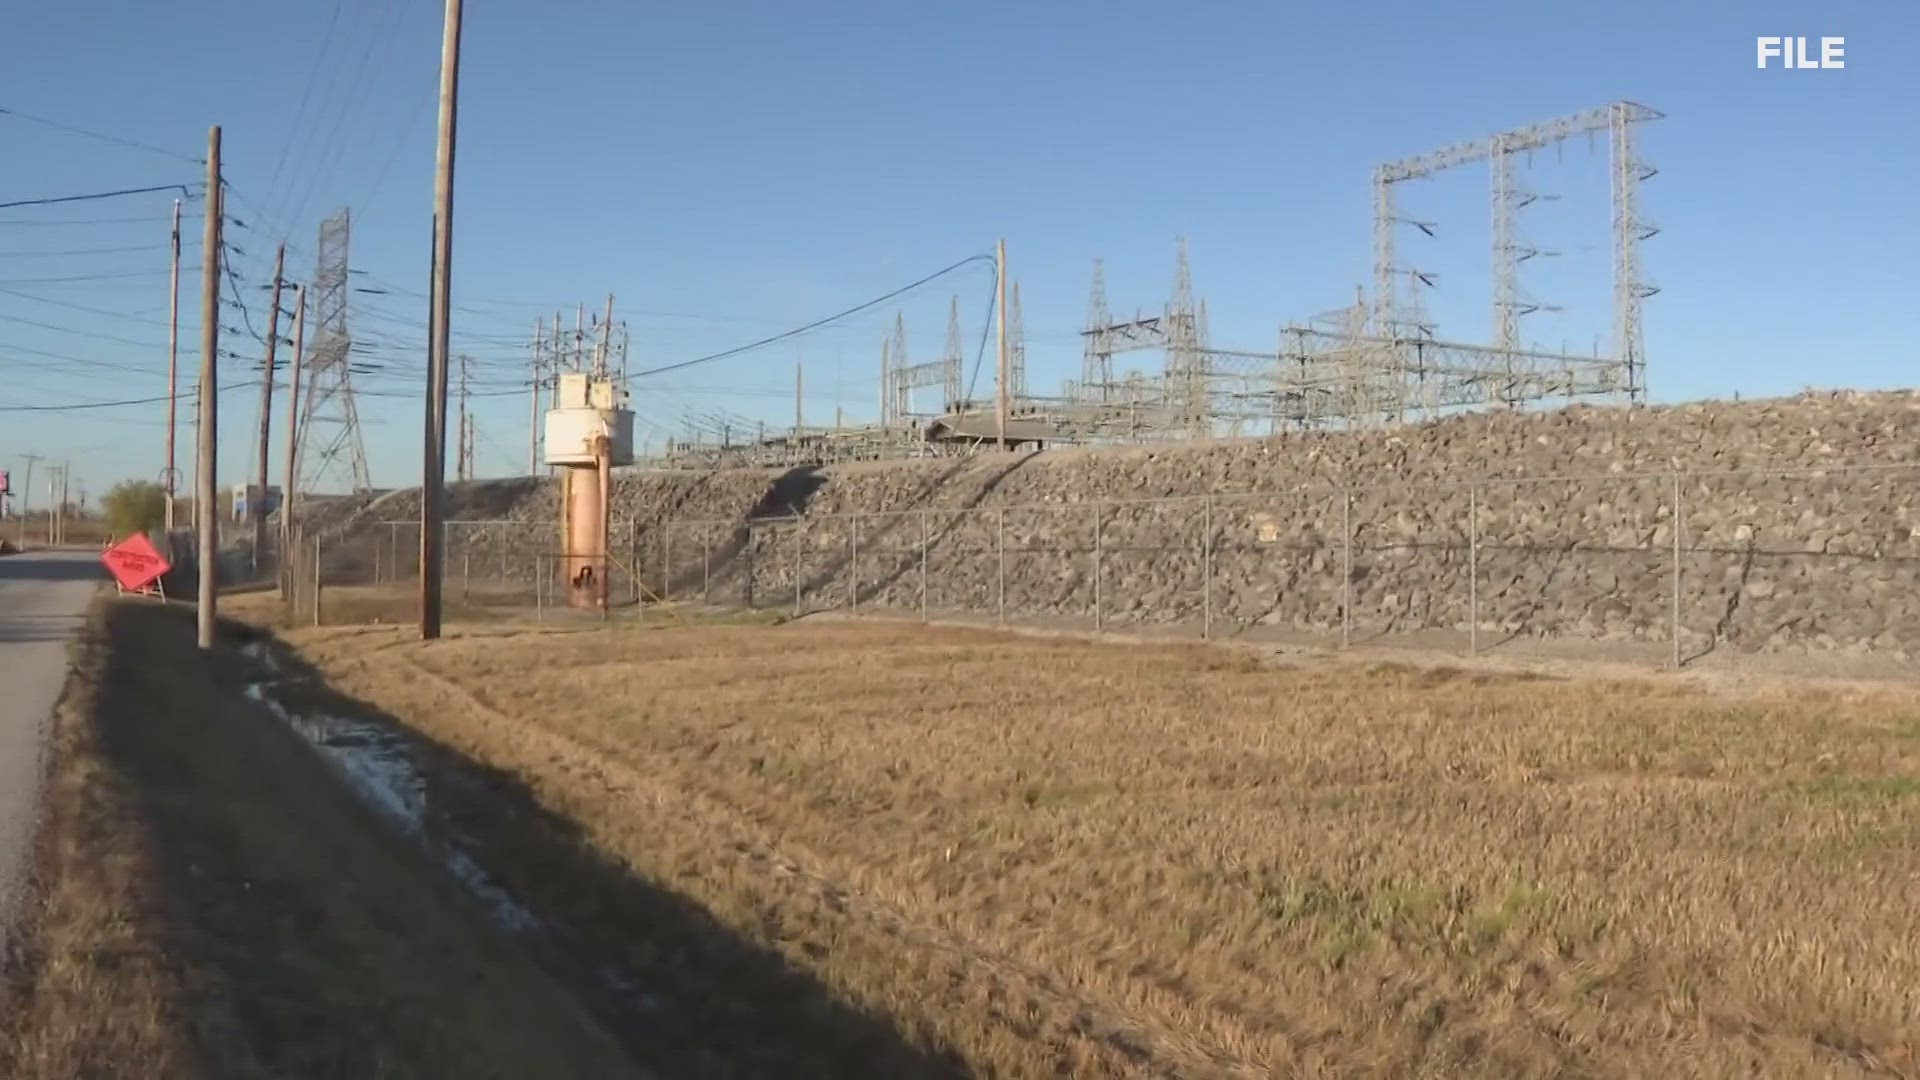 The St. Charles mayor announced a lawsuit against Ameren Missouri over contamination at the city's wellfields. The goal is to make sure Ameren pays for cleanup.